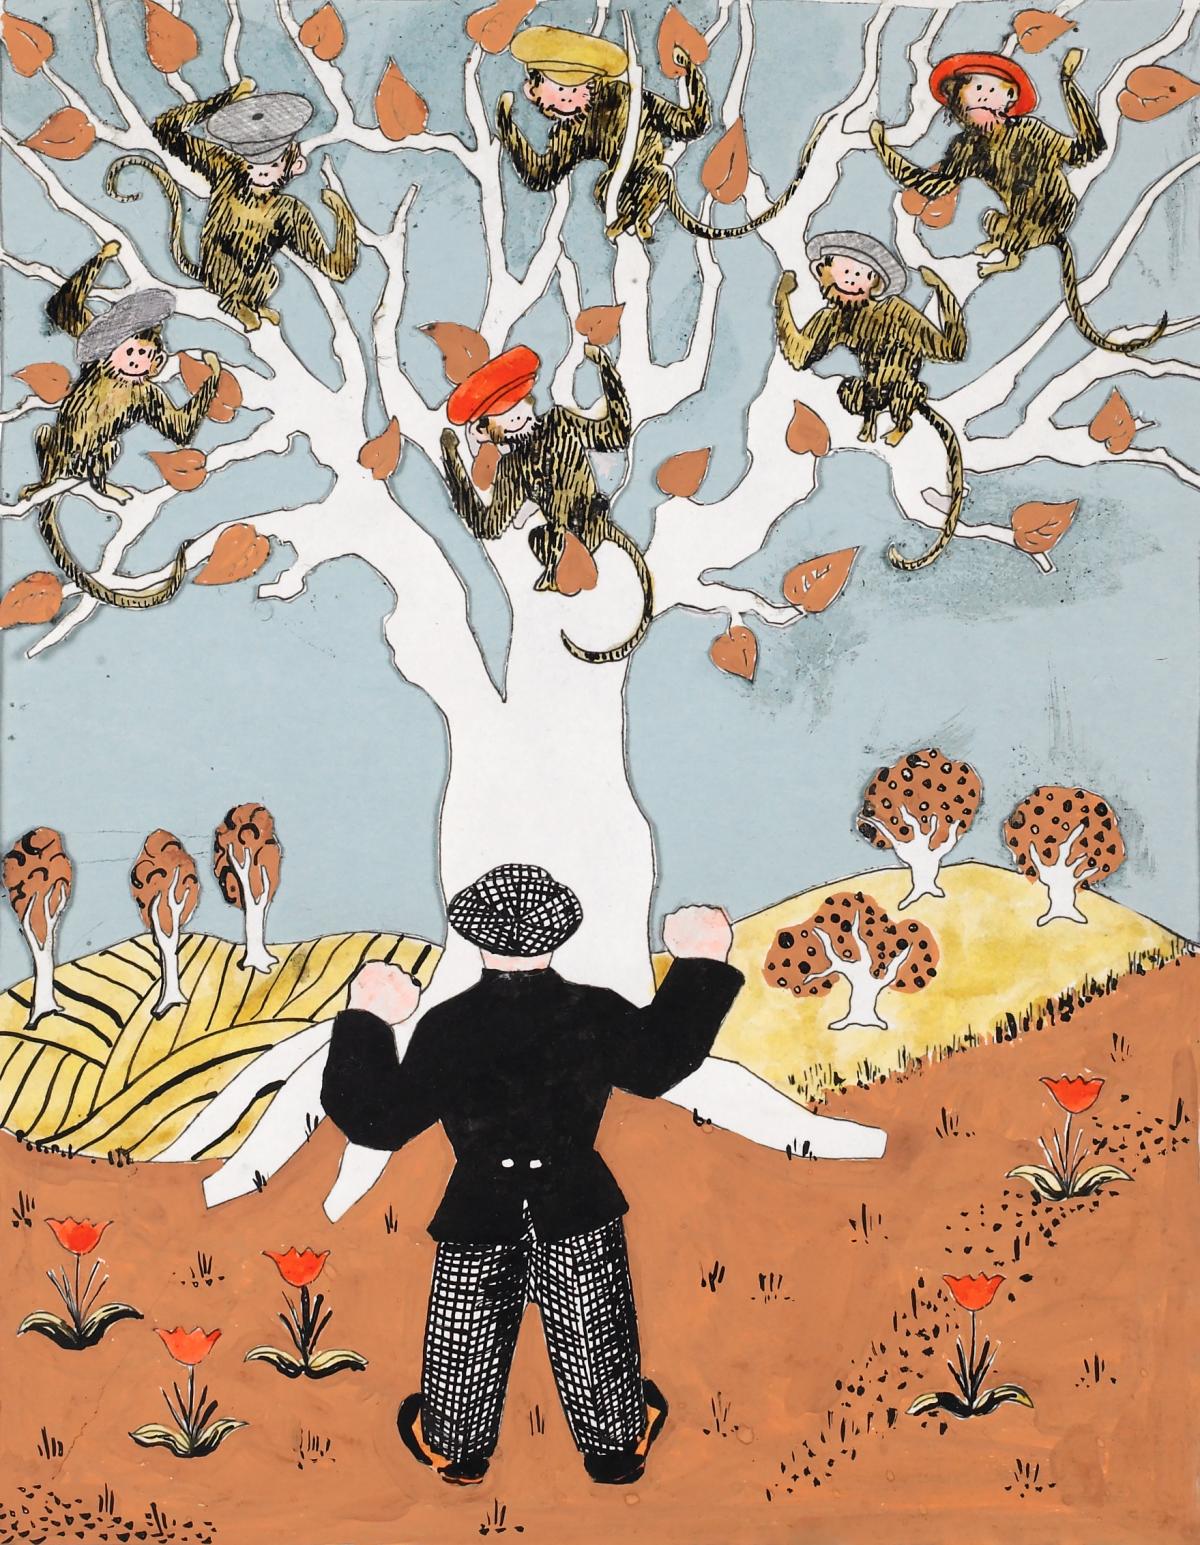 A man stands at the base of a white tree, in which monkeys wearing colorful caps are sitting